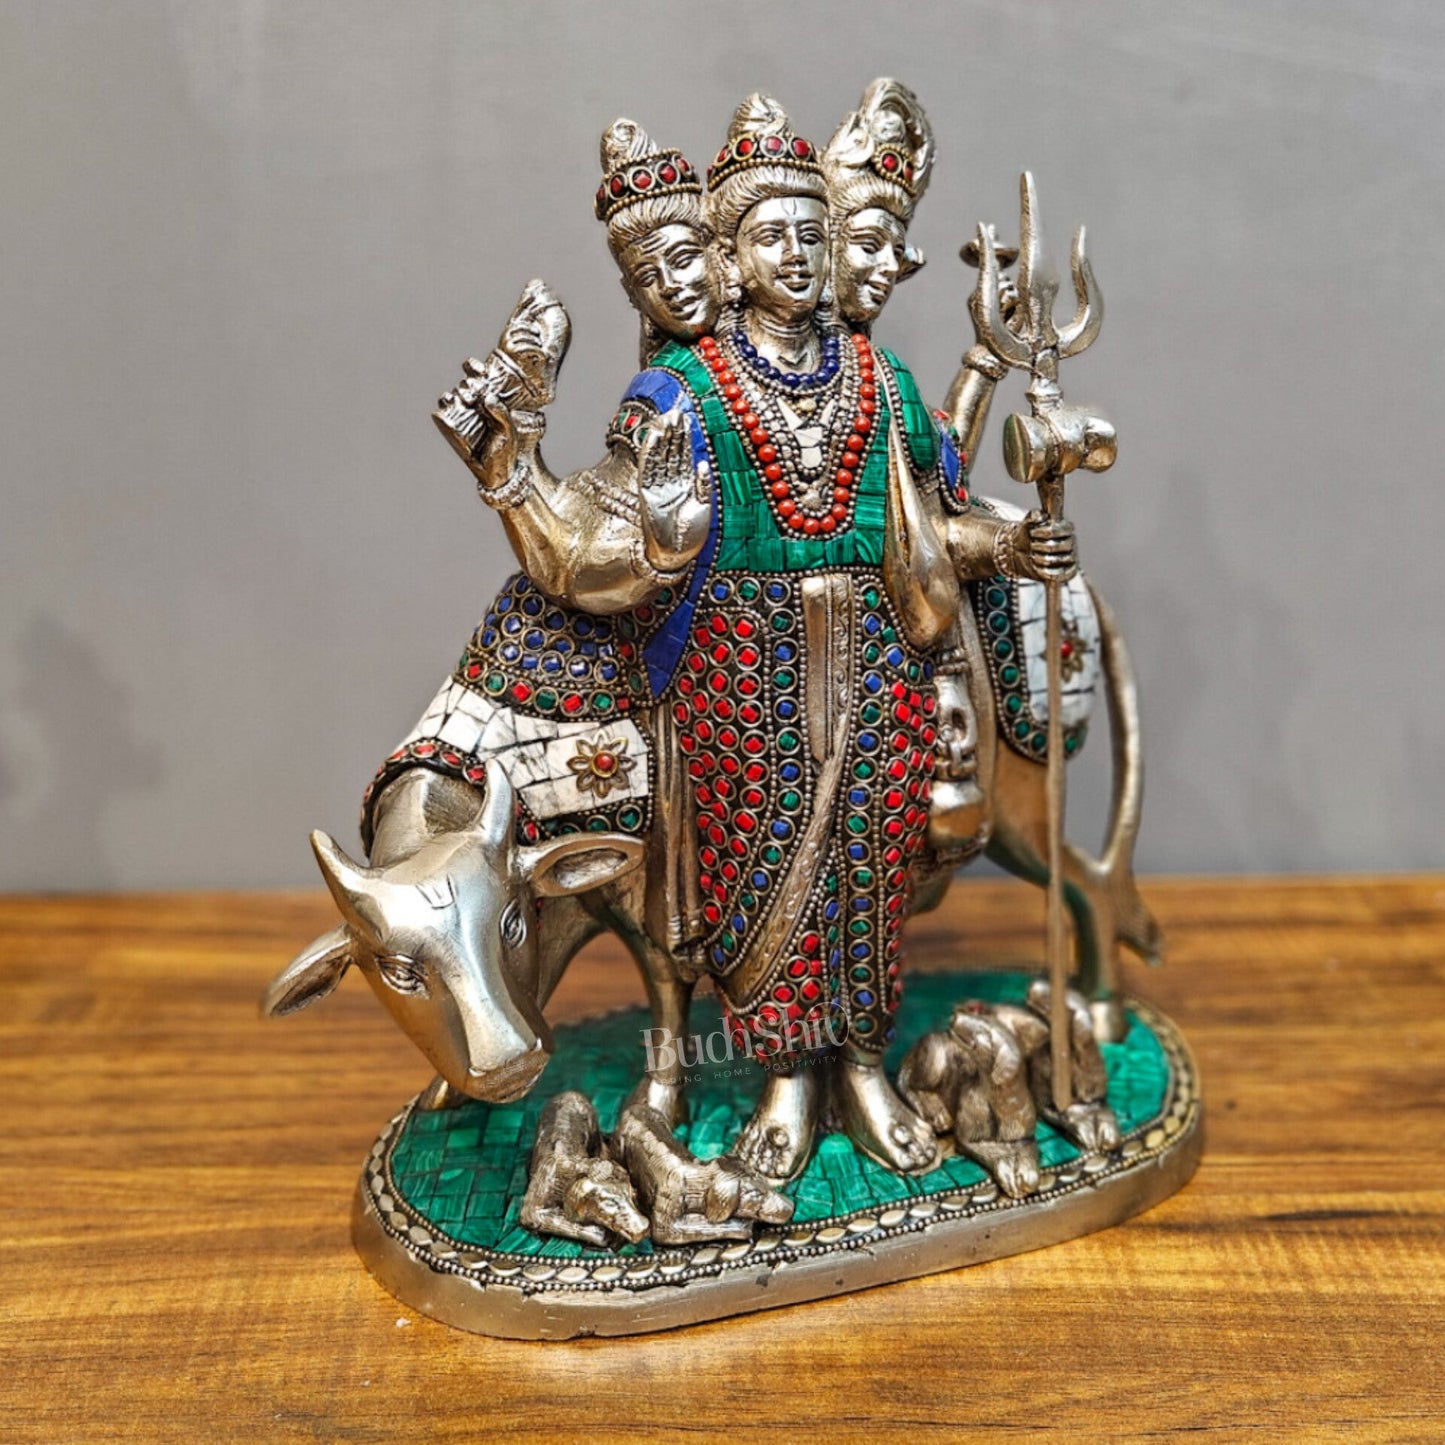 Silver plated Three faced Dattatreya guru with a cow and four dogs large sized 11 inches - Budhshiv.com